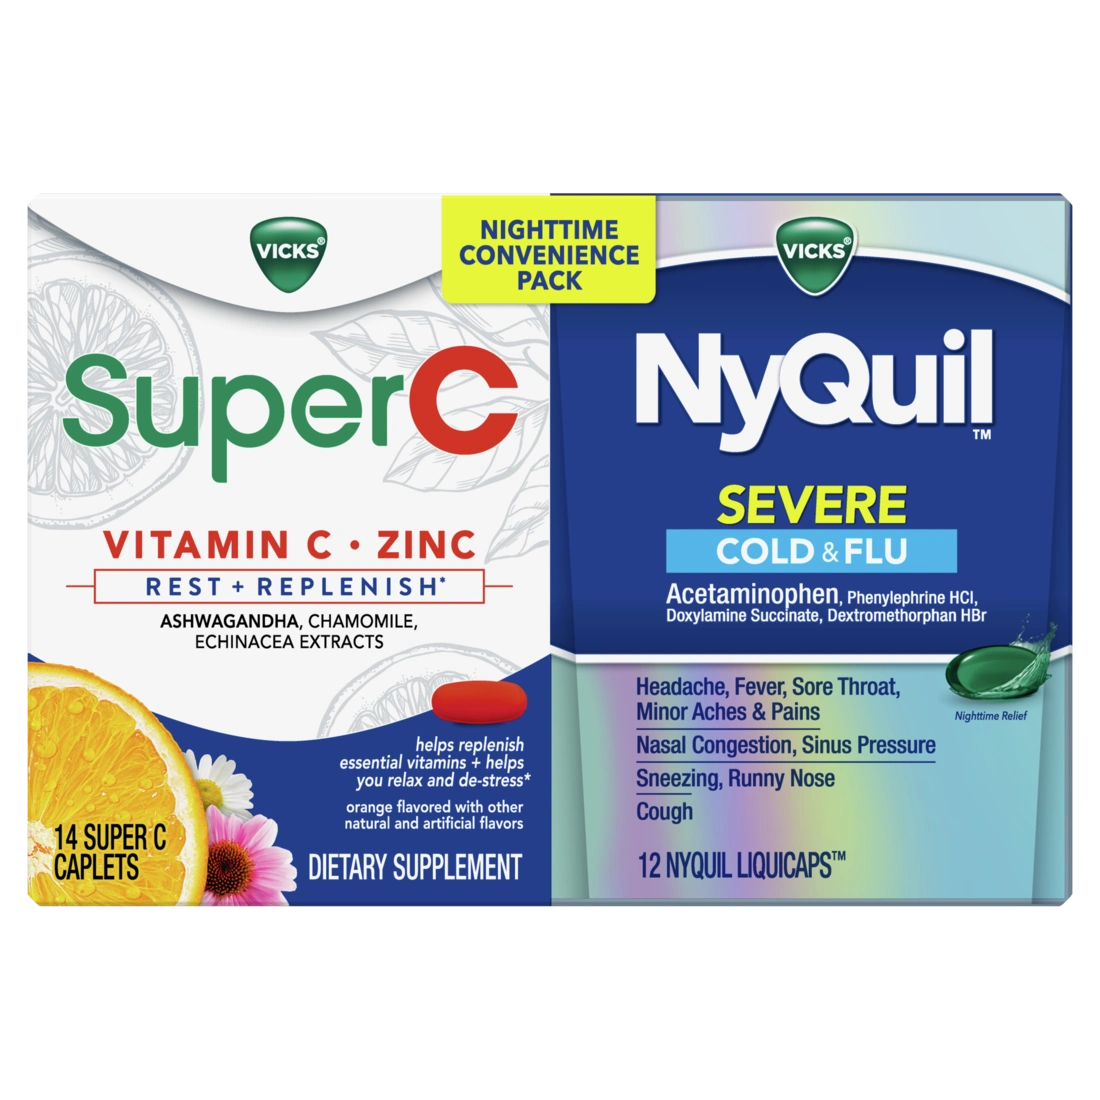 Vicks NyQuil Severe + Super C Convenience Pack